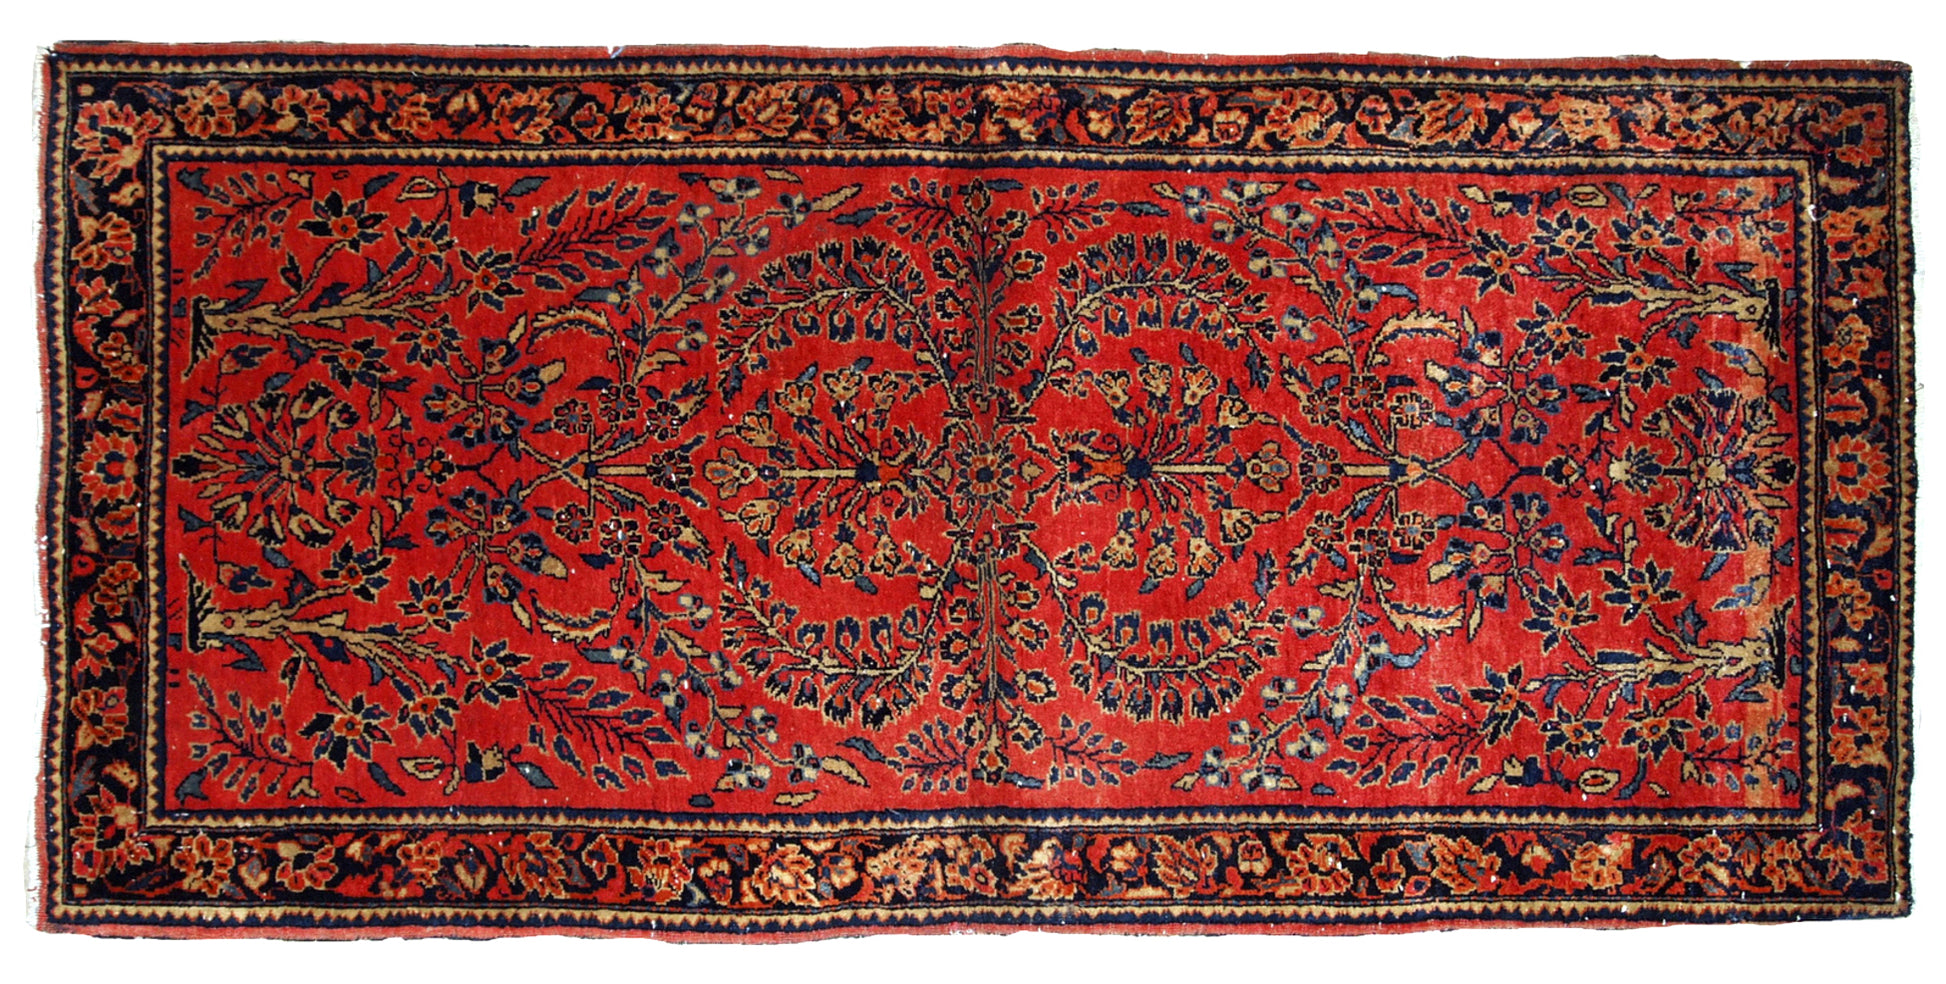 Antique hand made Persian Sarouk runner in red wool and floral design. The rug made in 1900s and it is in original good condition.